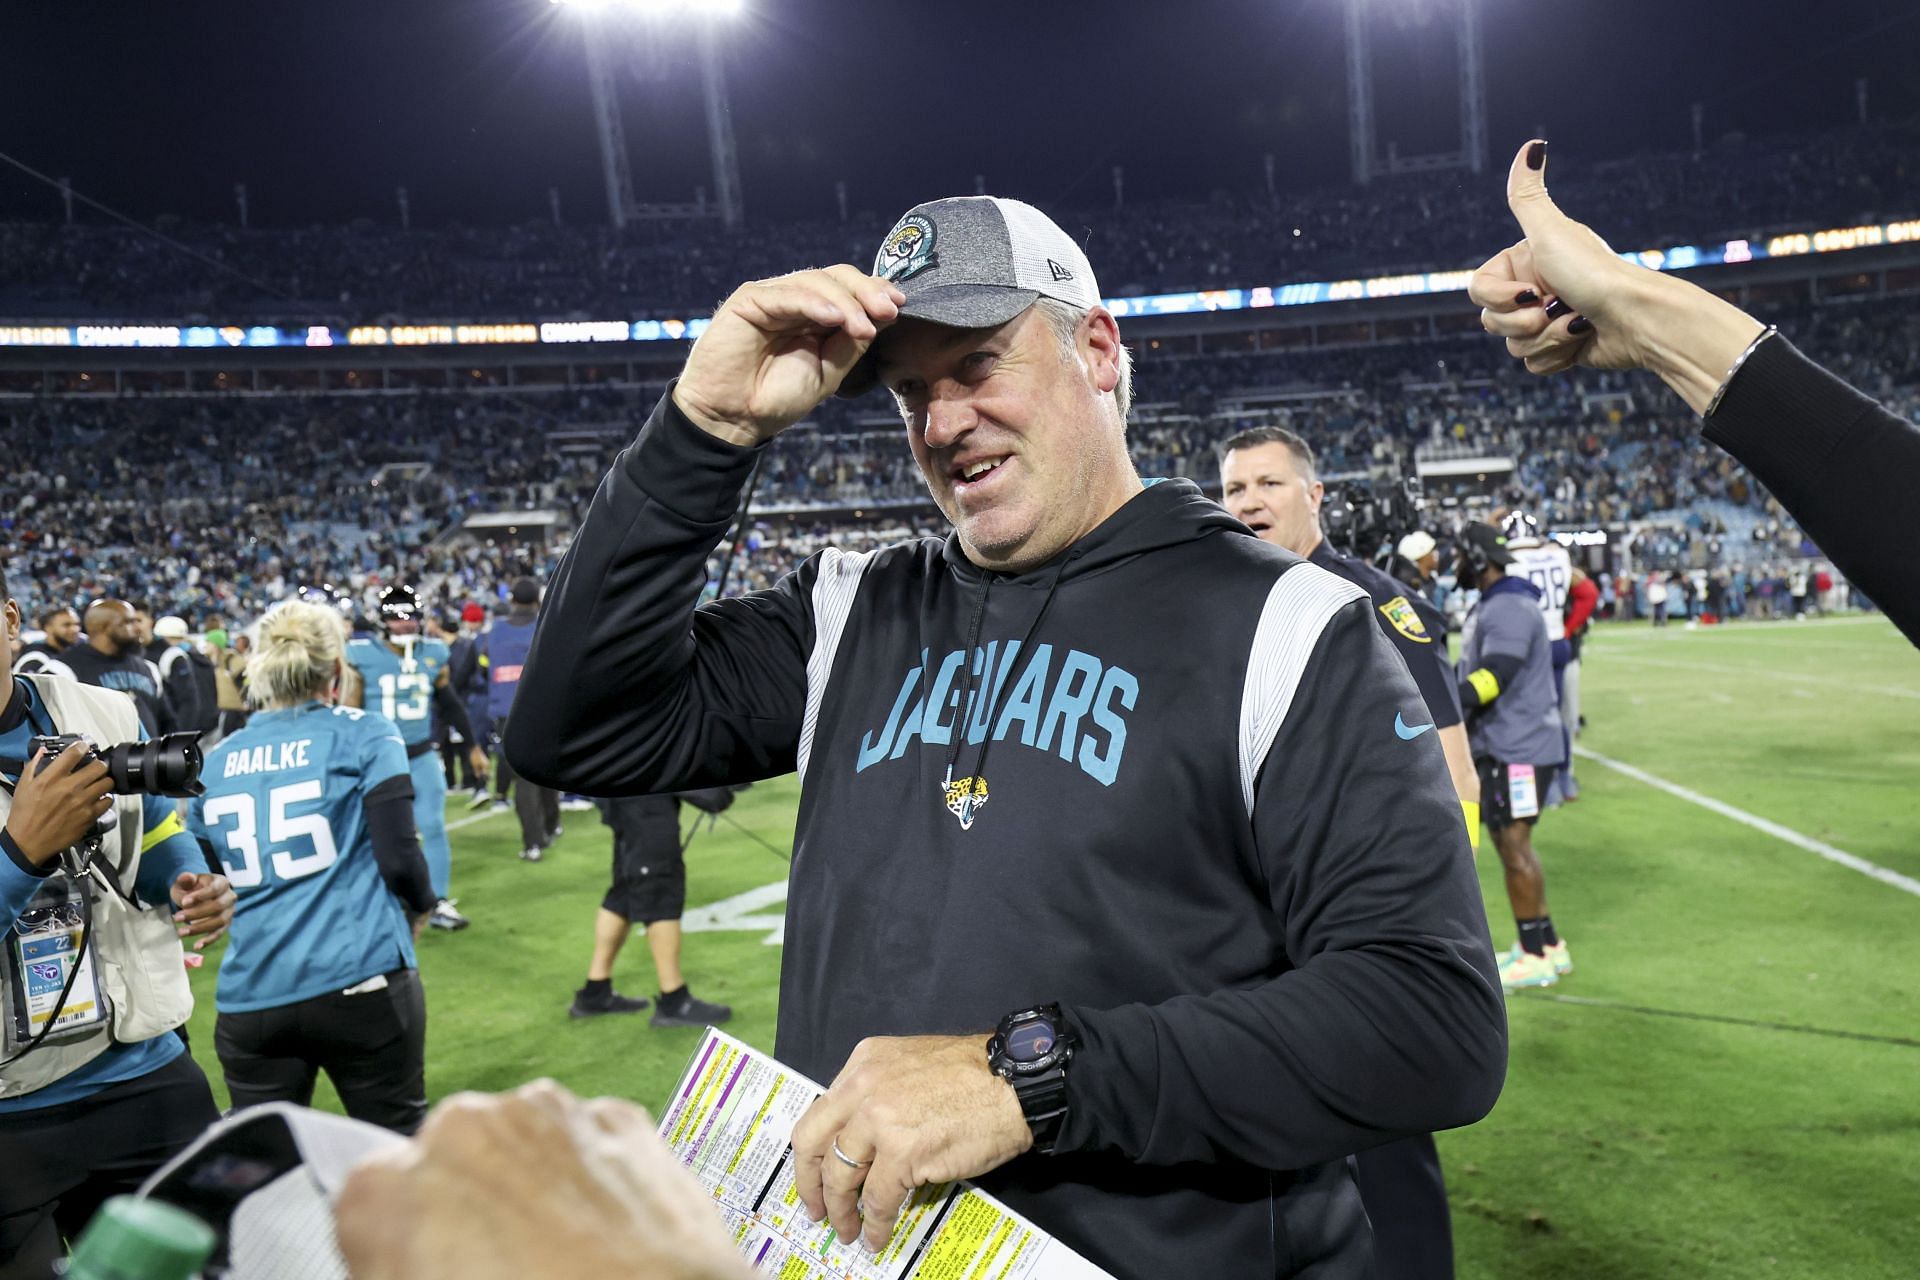 Doug Pederson with the Tennessee Titans against the Jacksonville Jaguars